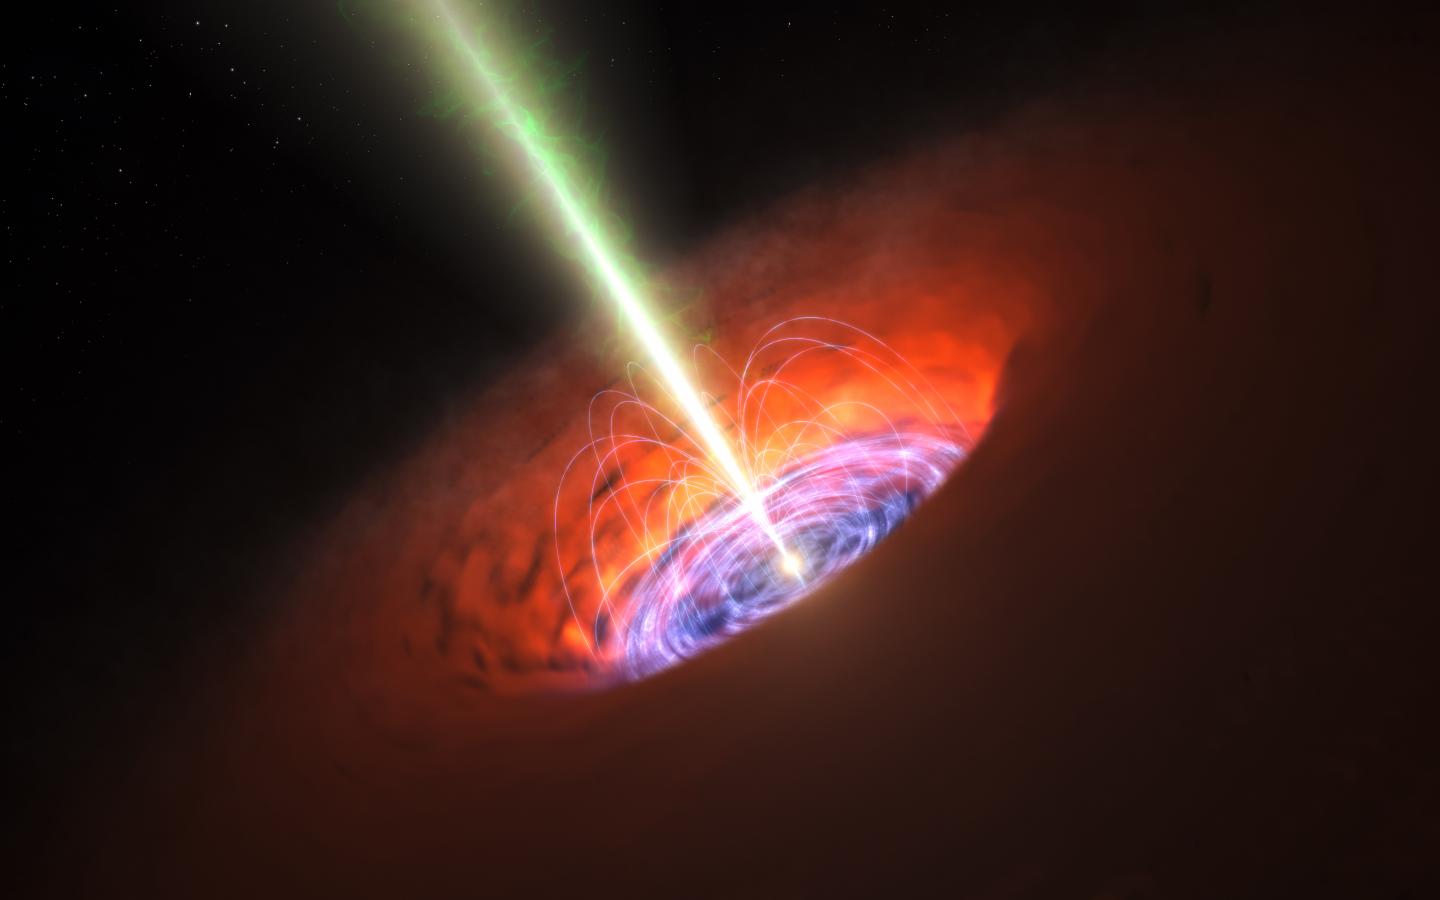 A Supermassive Black Hole and Its Intense Magnetic Field (Artist's Impression)